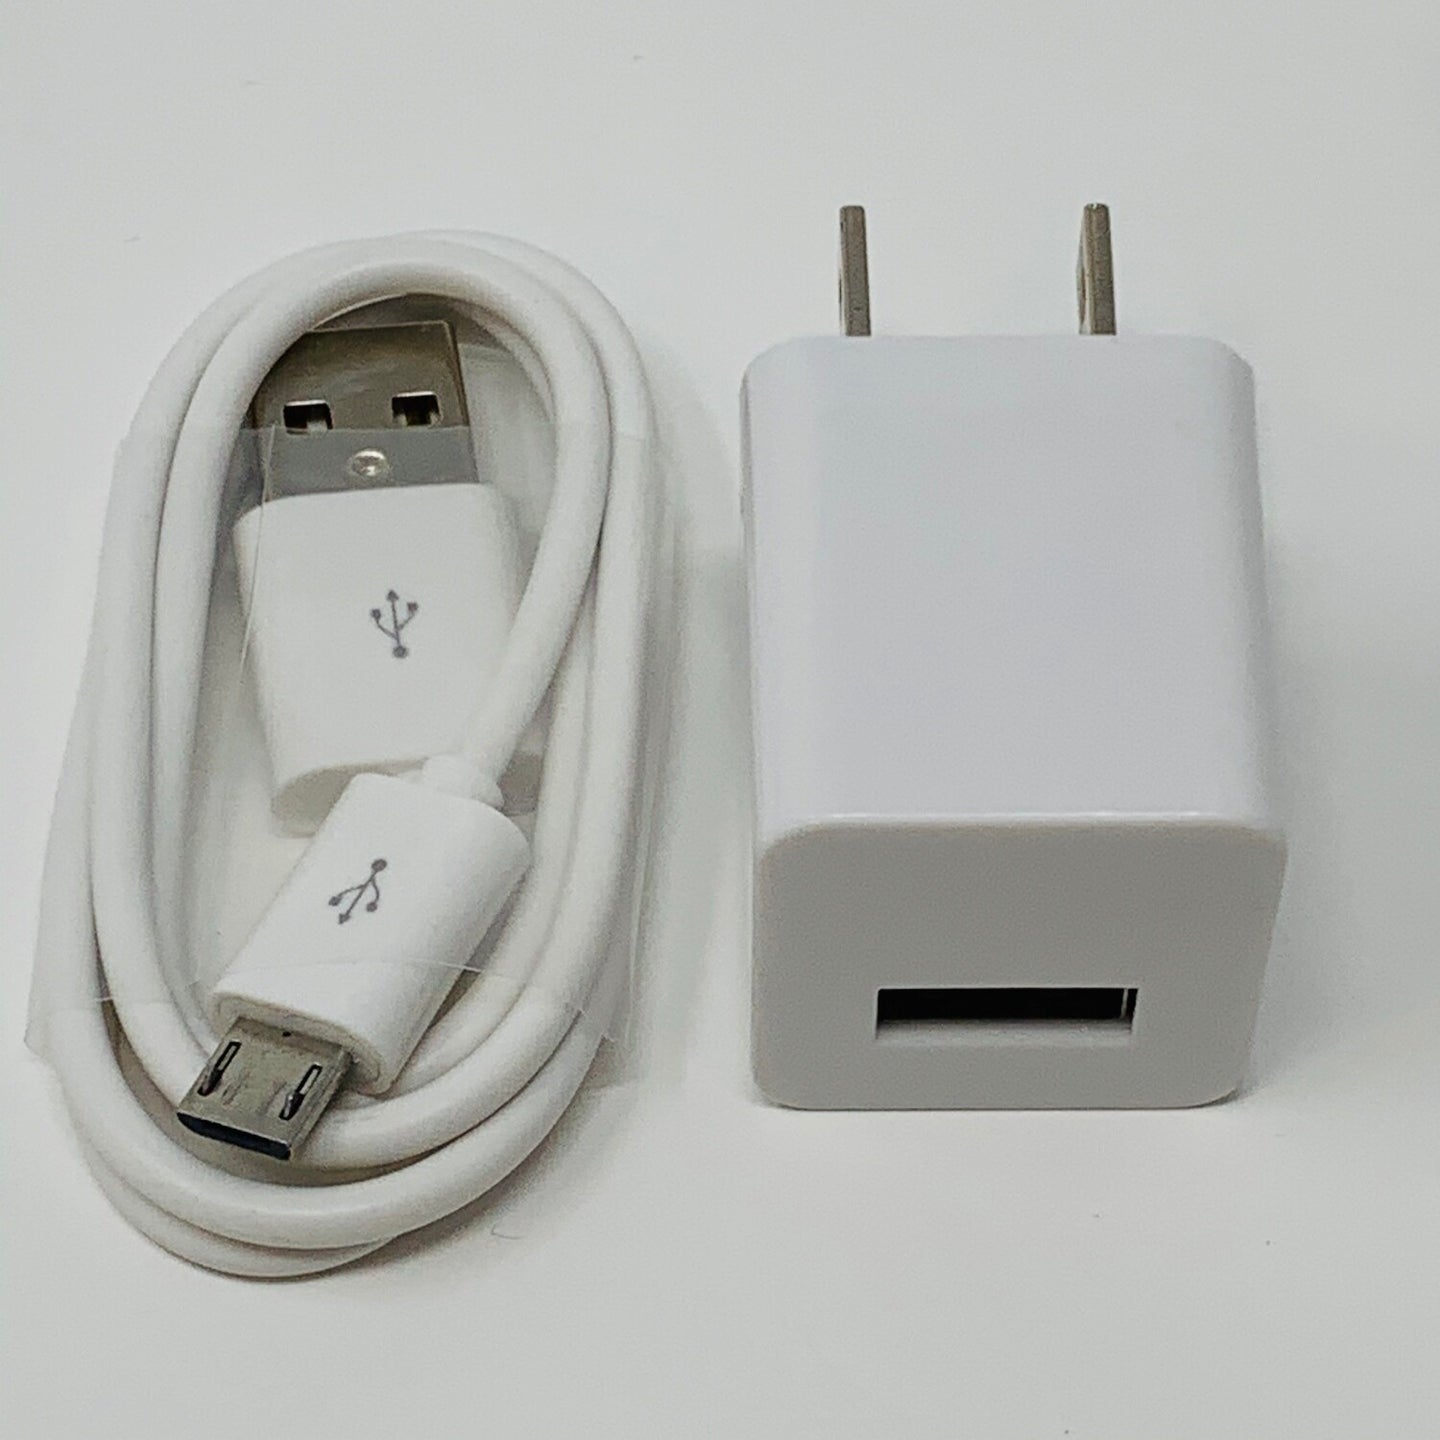 MSB wall charger and cord